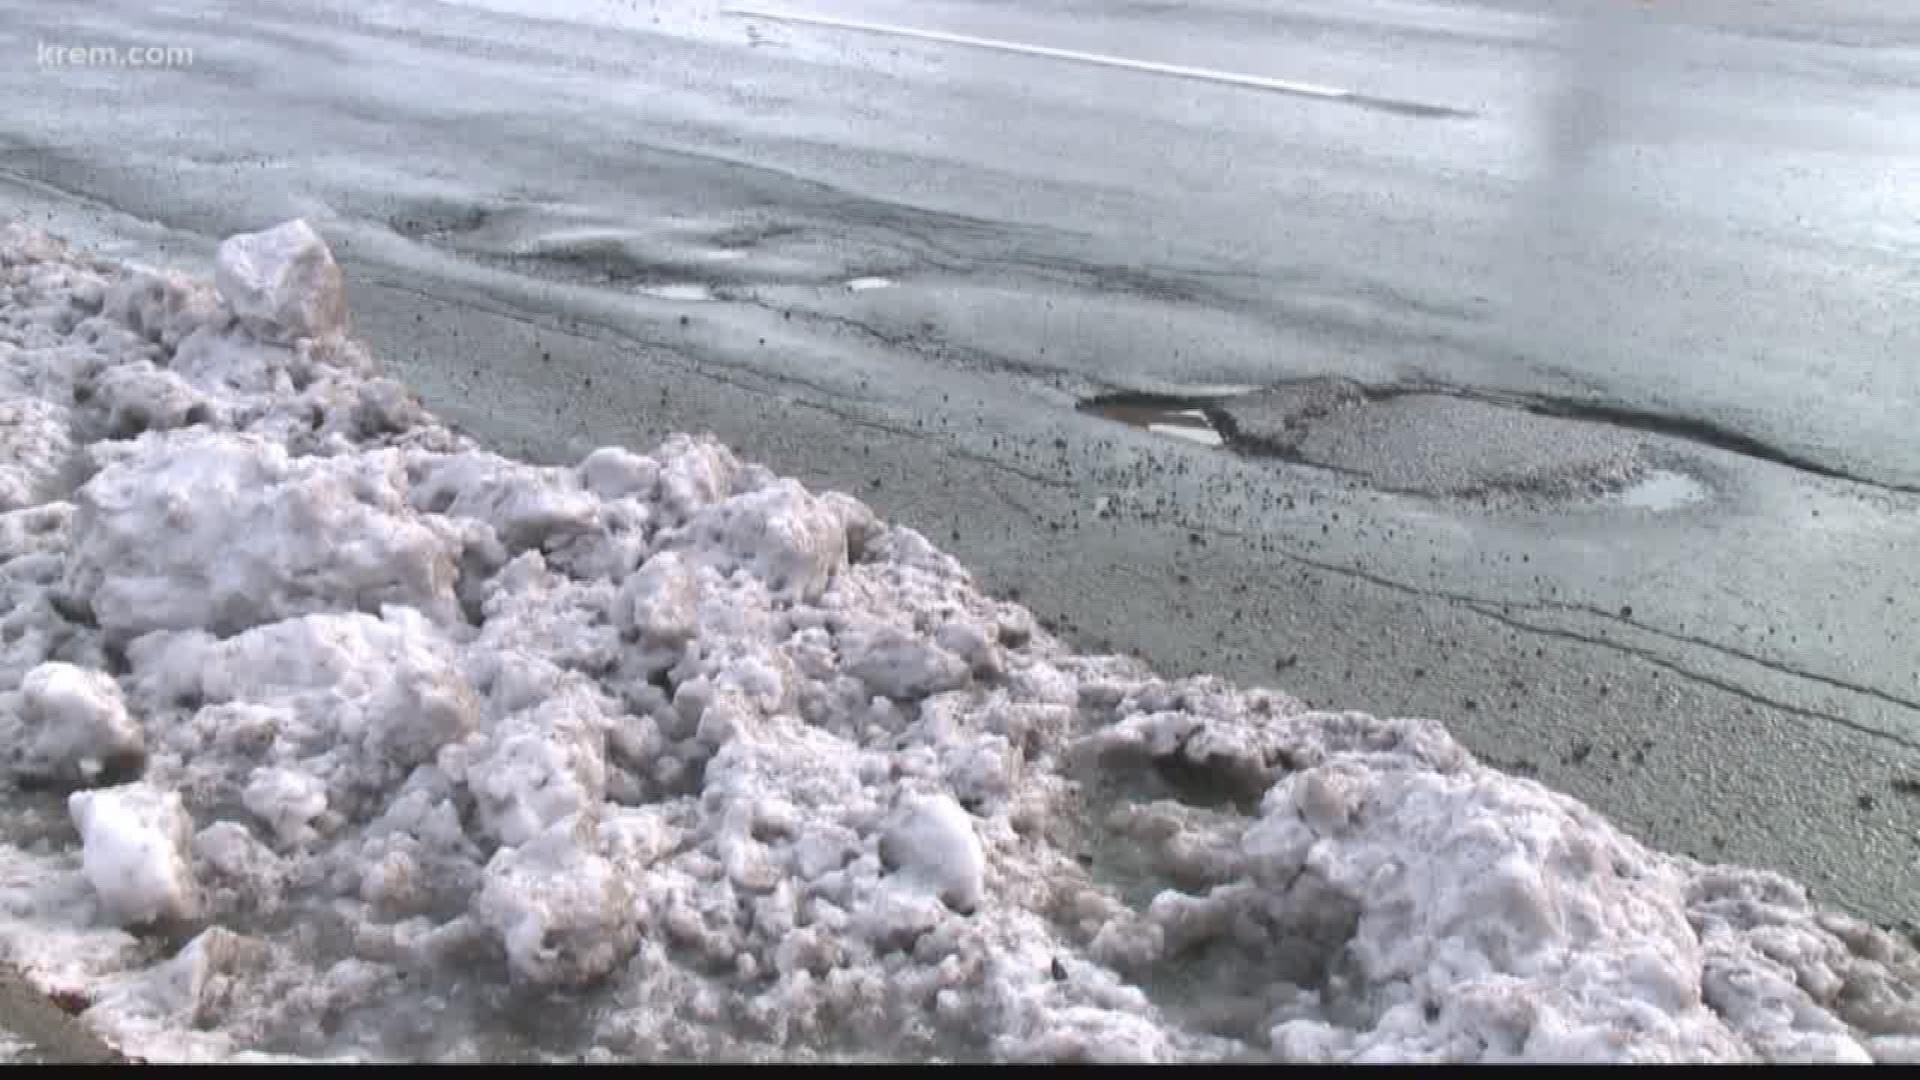 KREM Reporter Shayna Waltower spoke with city officials about how this year's potholes issue should be lower than previous years.